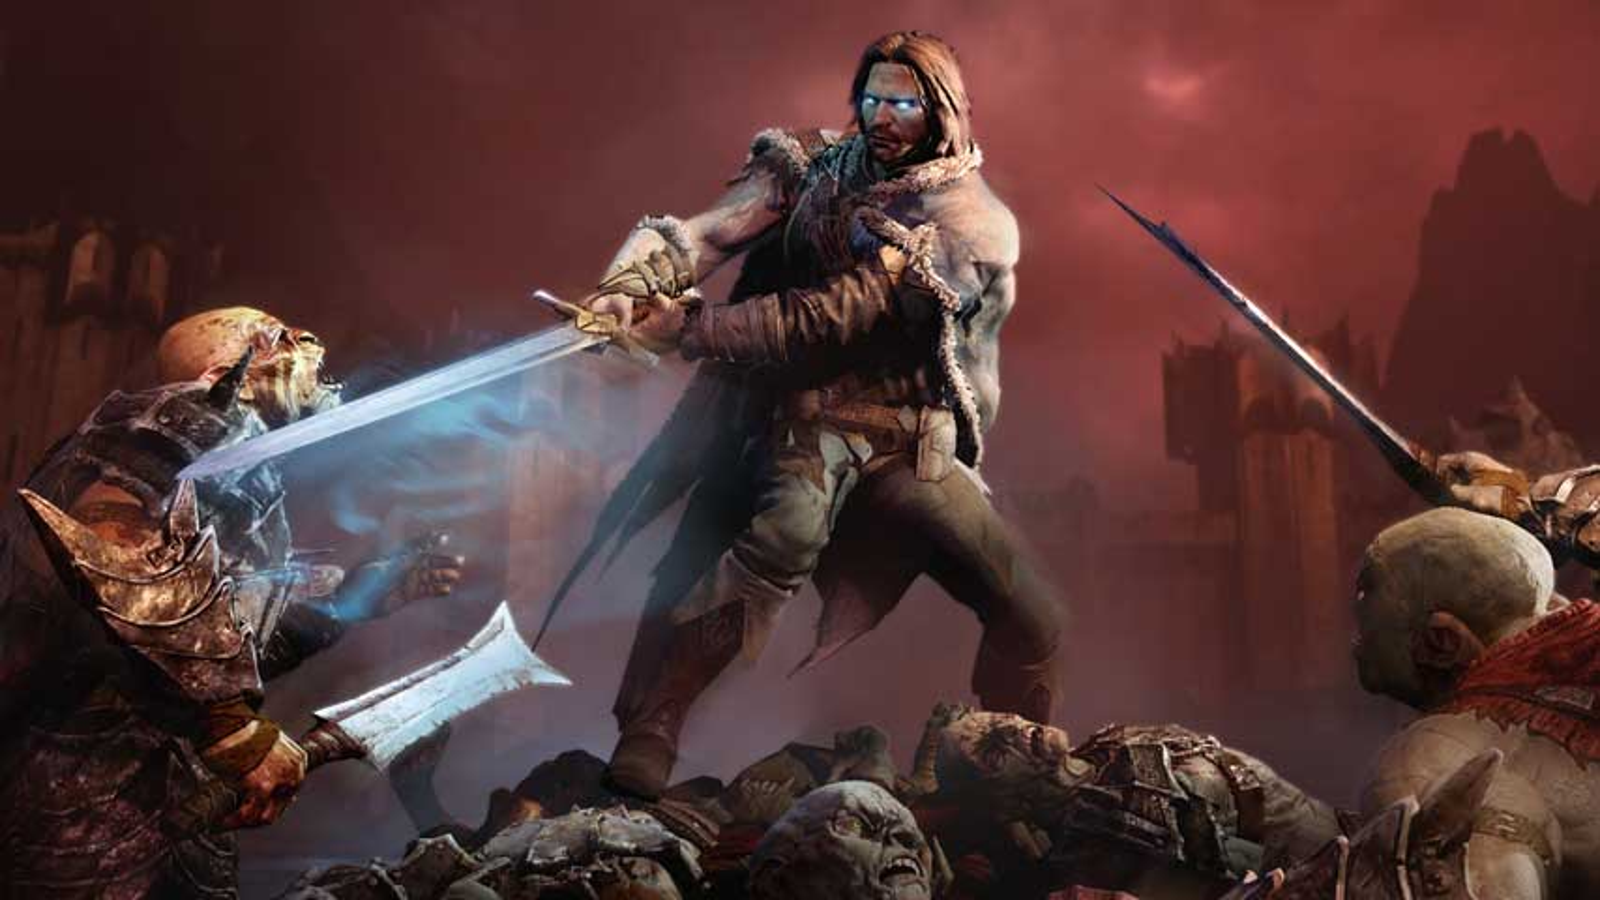 Middle-earth: Shadow of Mordor Gameplay (PS3 HD) 